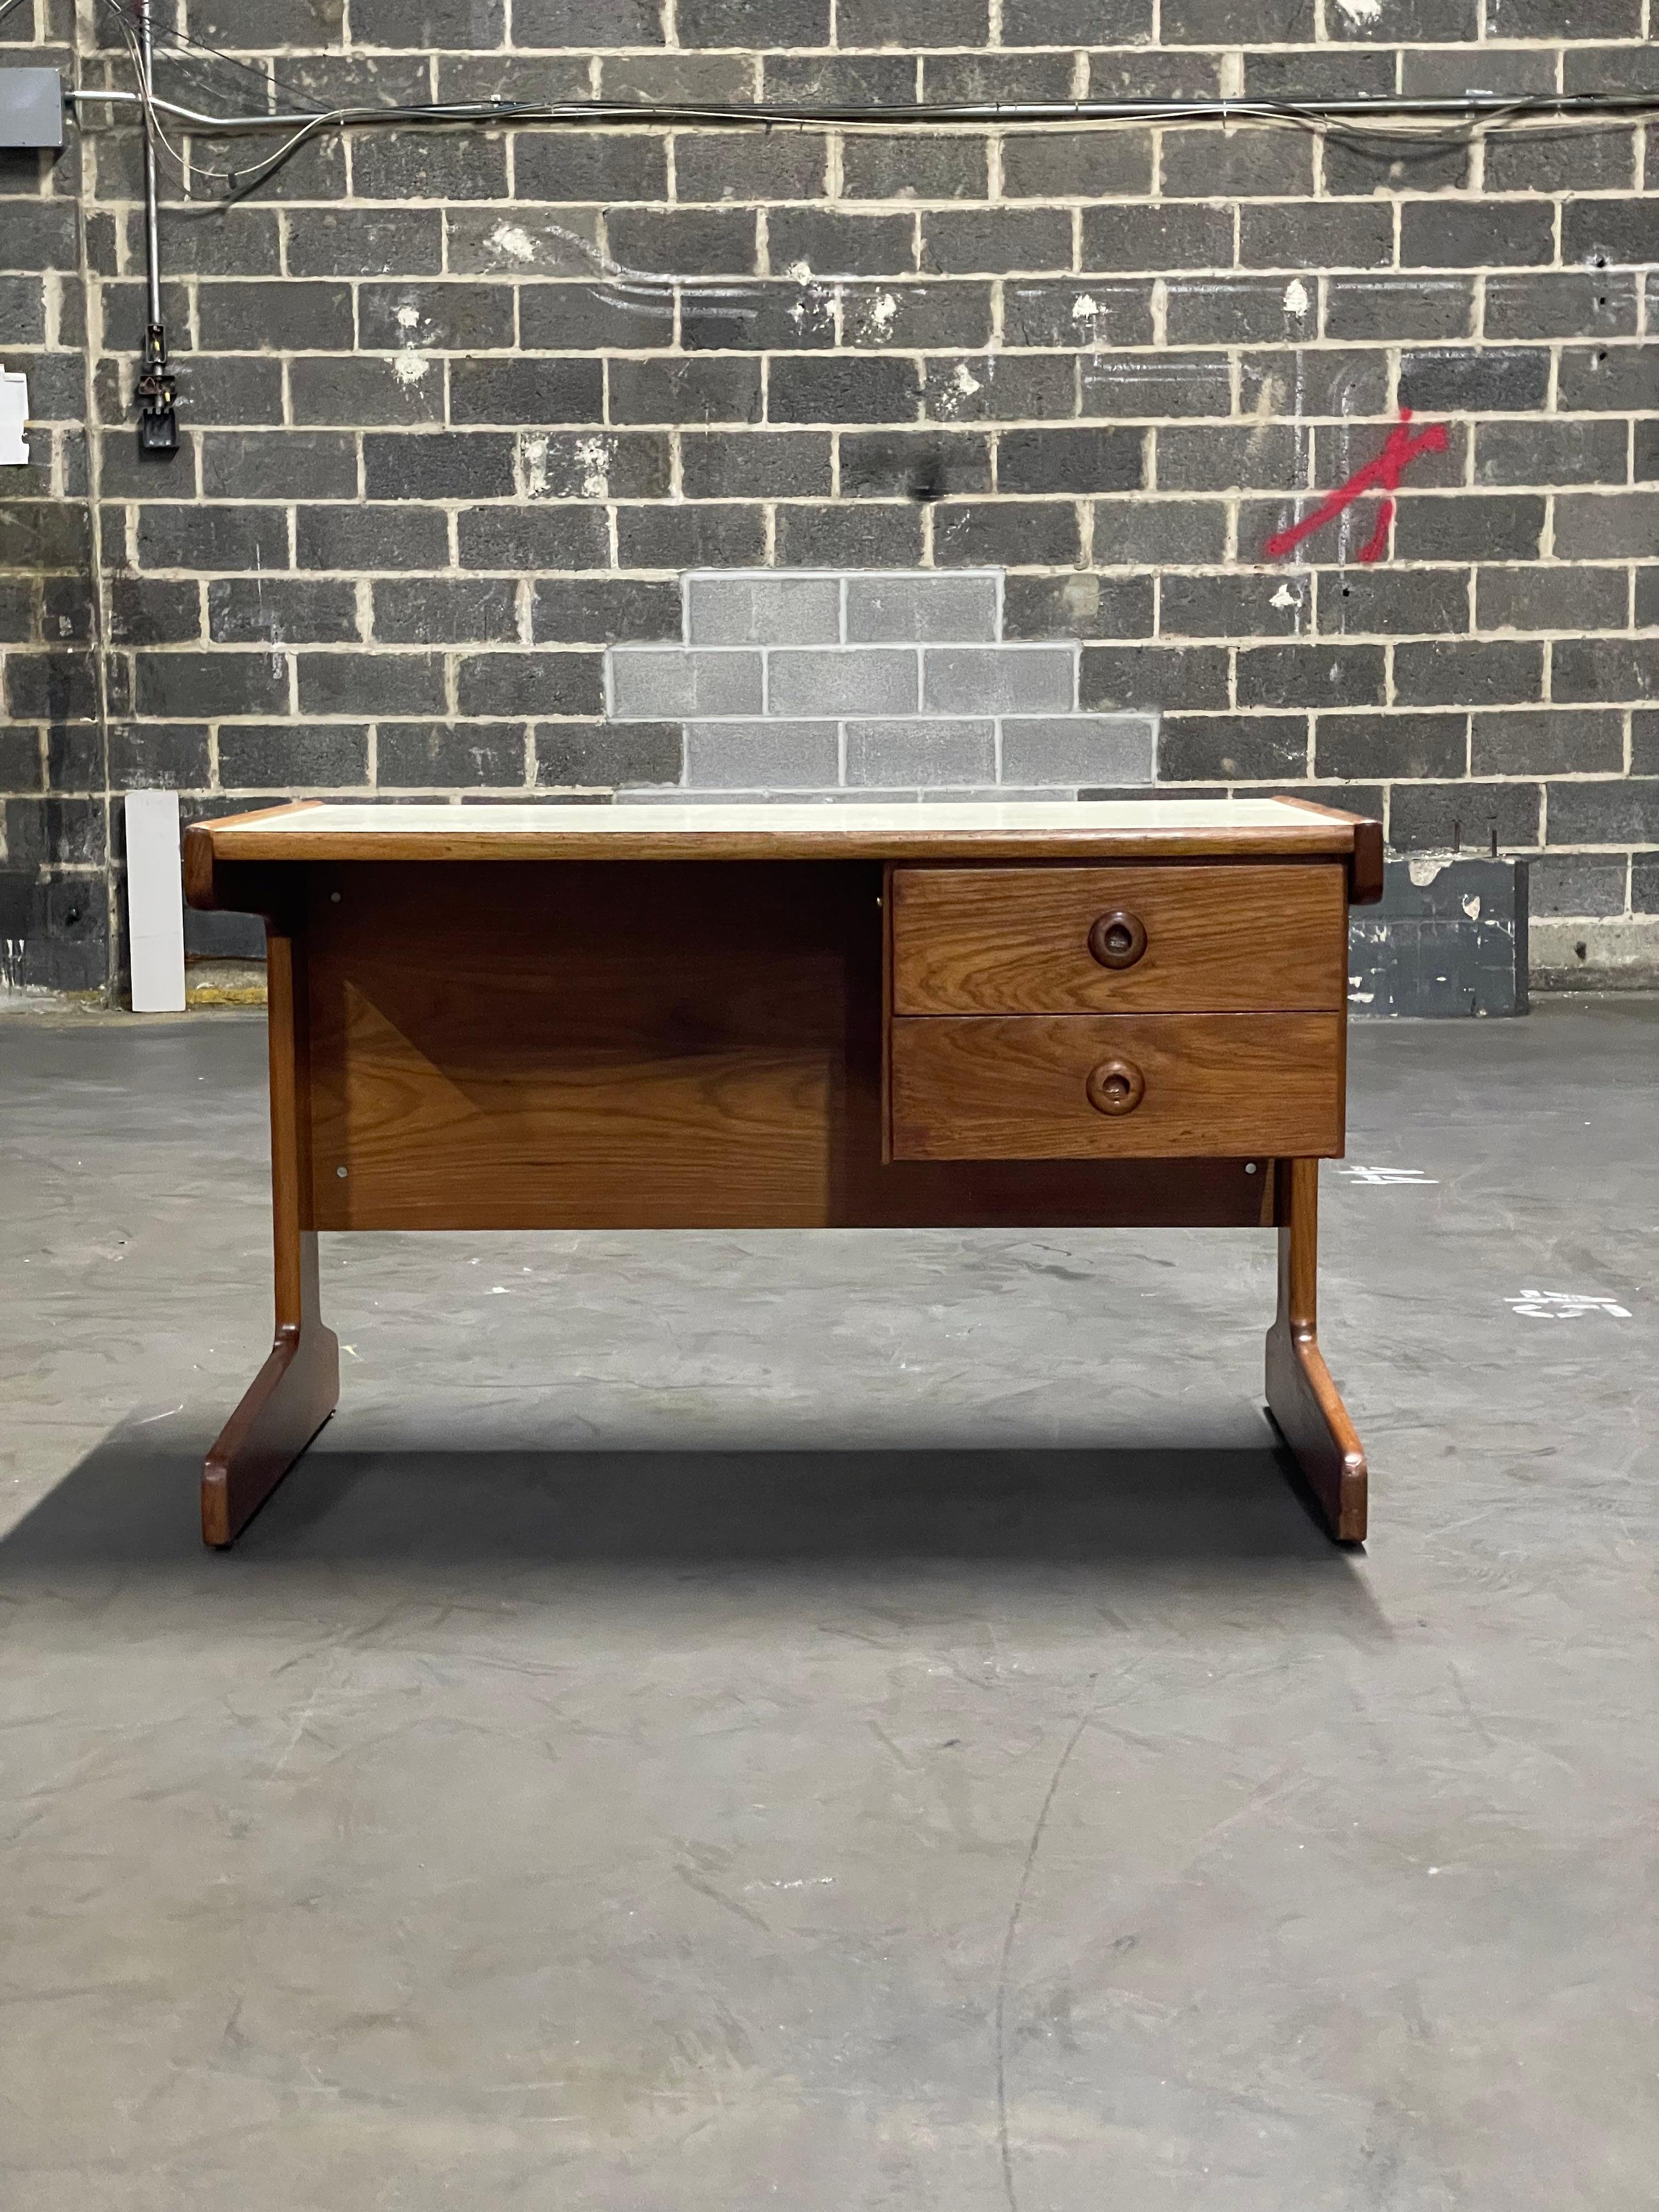 Available now, this Mid-Century Modern Desk designed by Geraldo de Barros for Hobjeto is is gorgeous!
 
The desk is entirely made in Cerejera wood and features two floating drawers and white Formica top. The wood has been refinished and besides